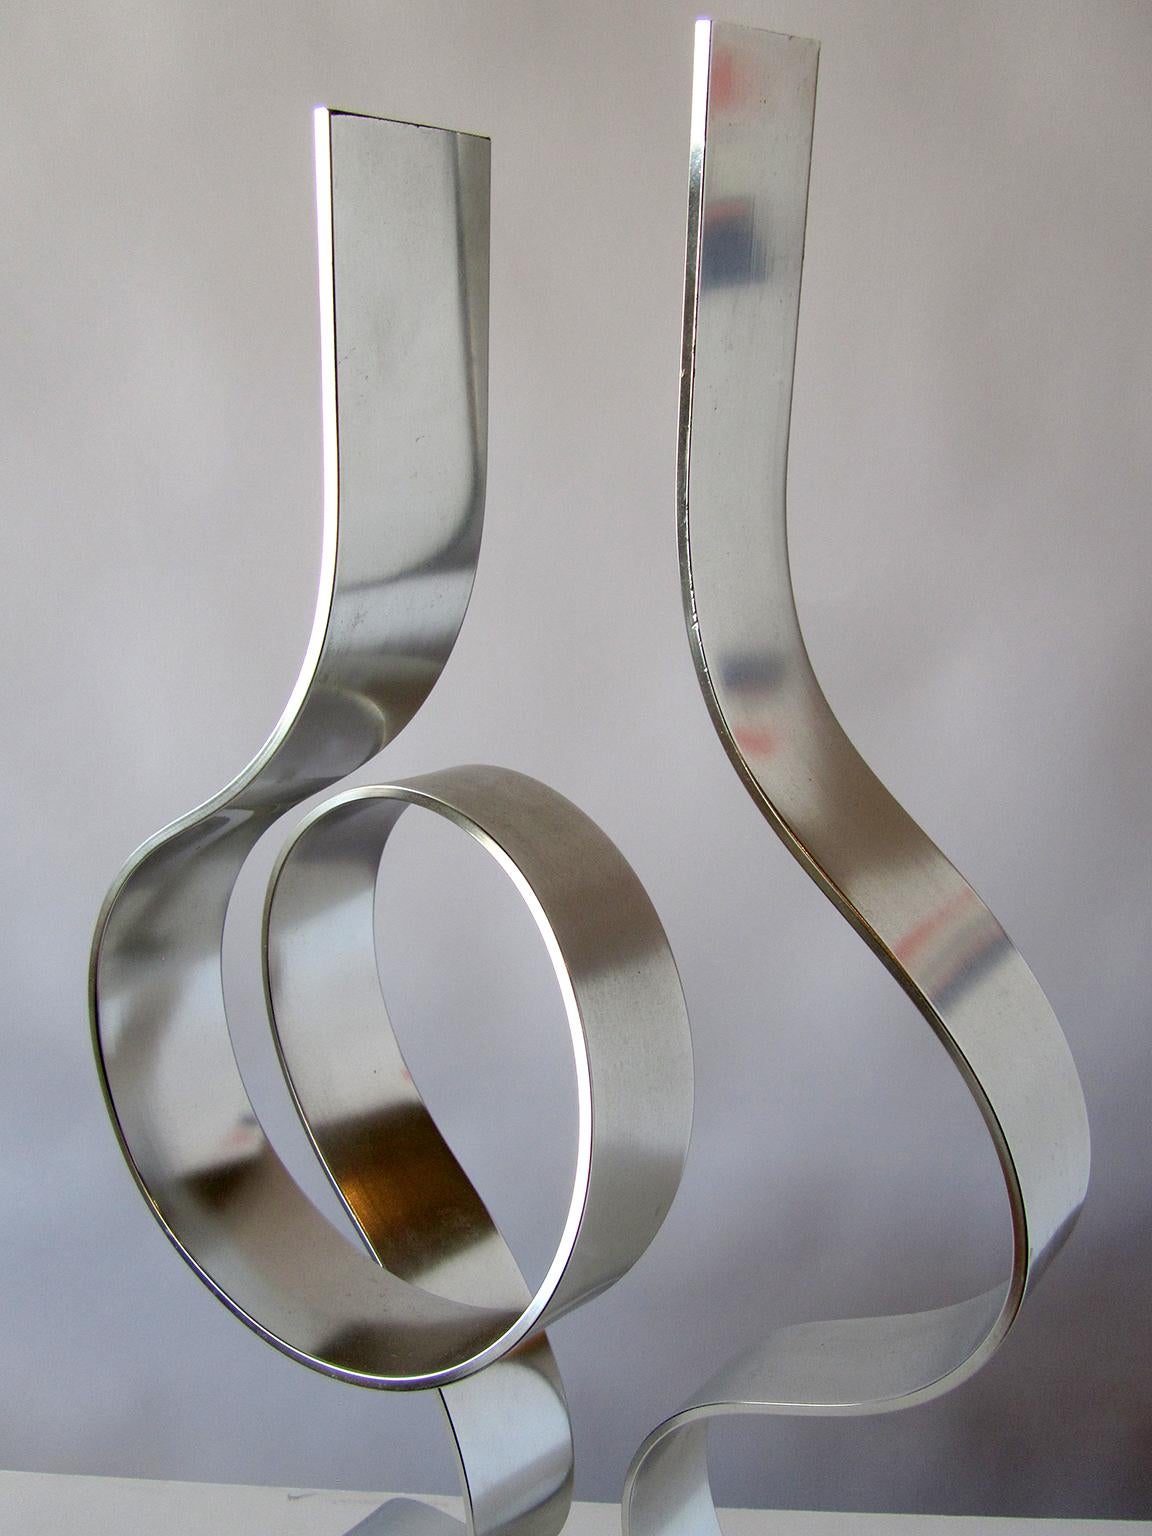 American Modern Abstract Expressionist Polished Steel Sculpture, Dan Murphy For Sale 1